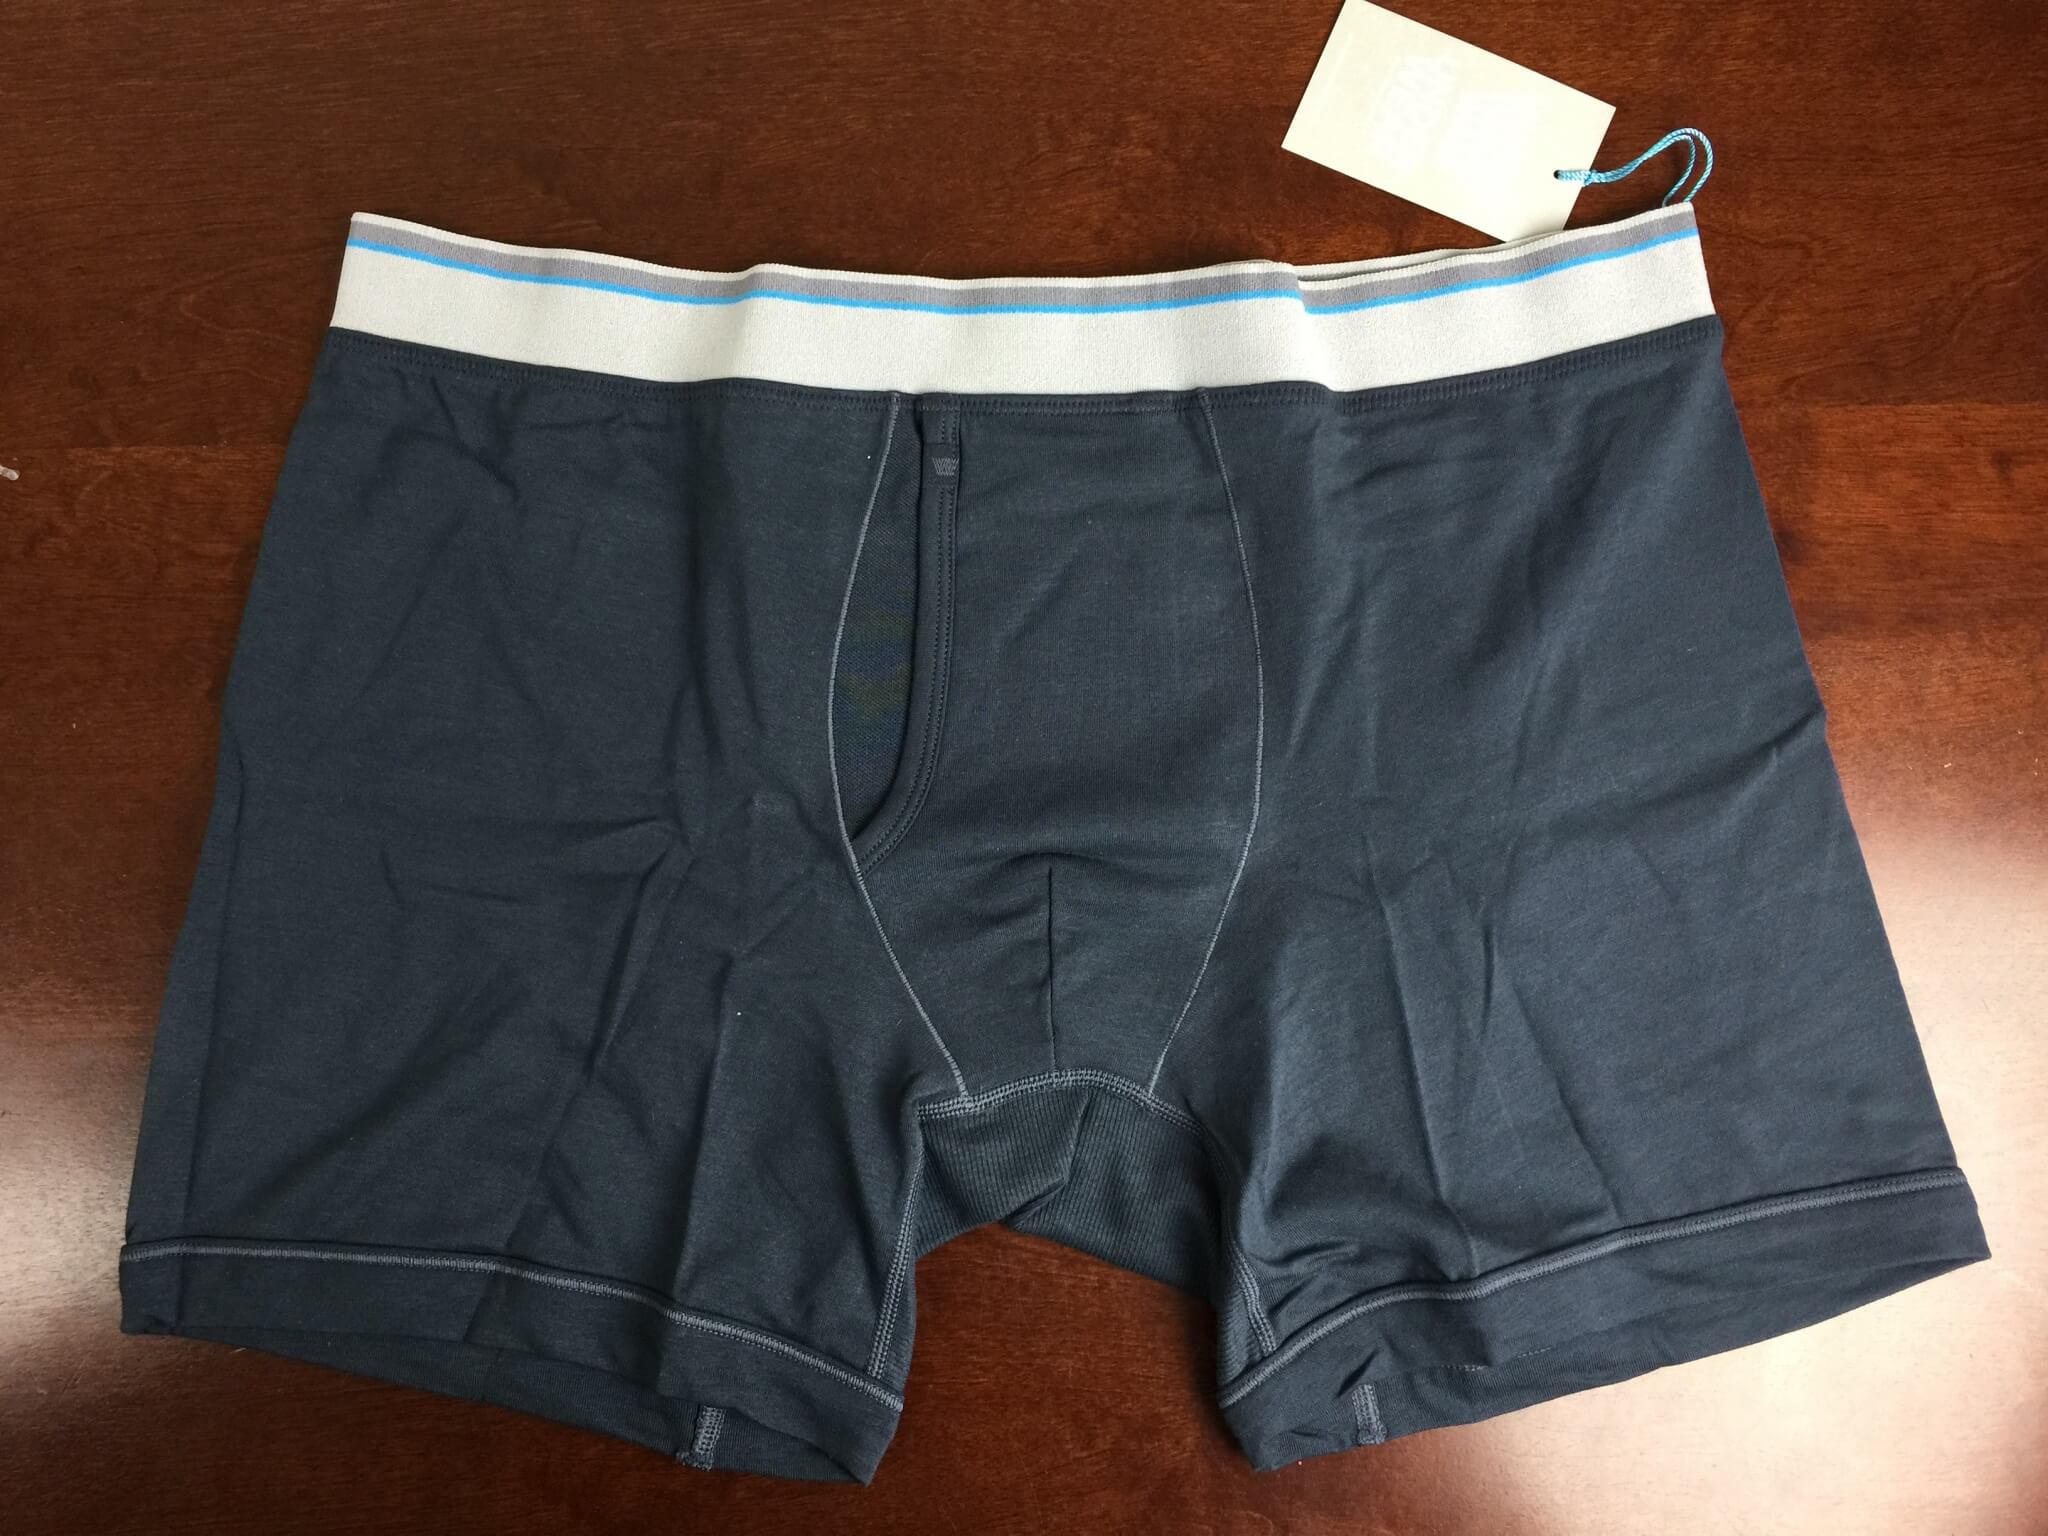 Bespoke Post BRIEFS Box Review & Coupon - September 2015 - Hello ...